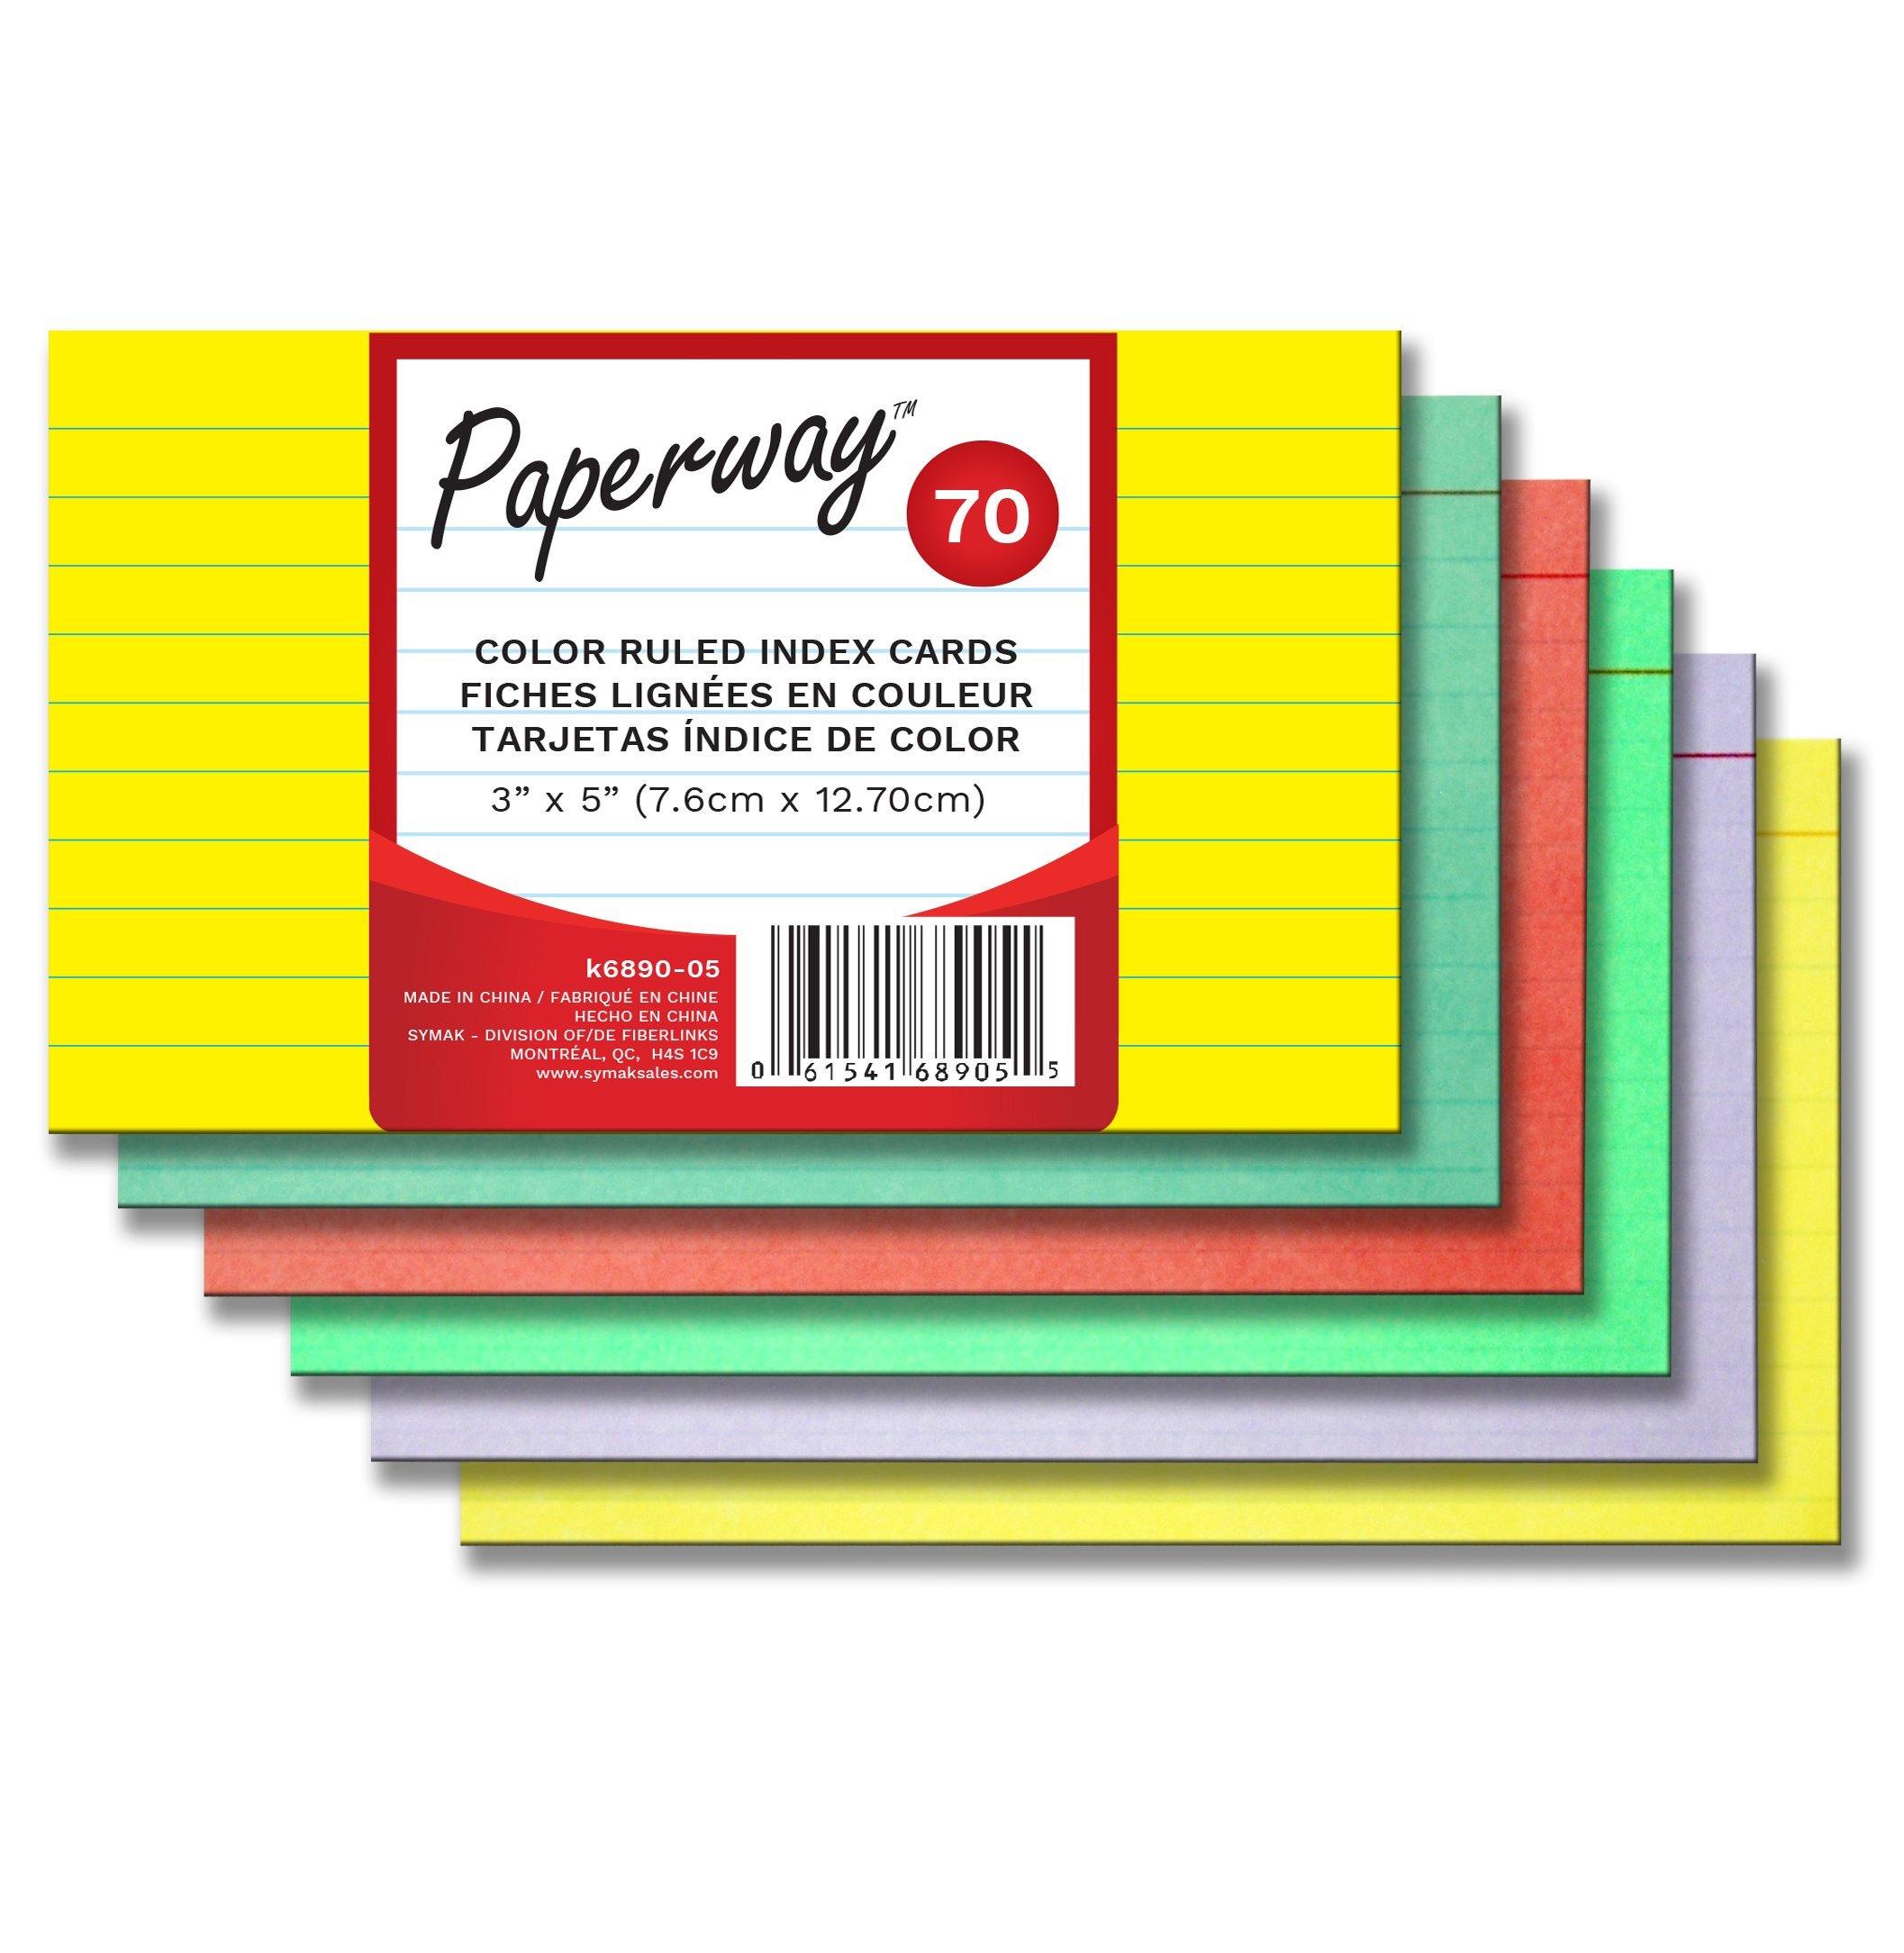 70 Color Ruled Index Cards 3X5" - Dollar Max Depot